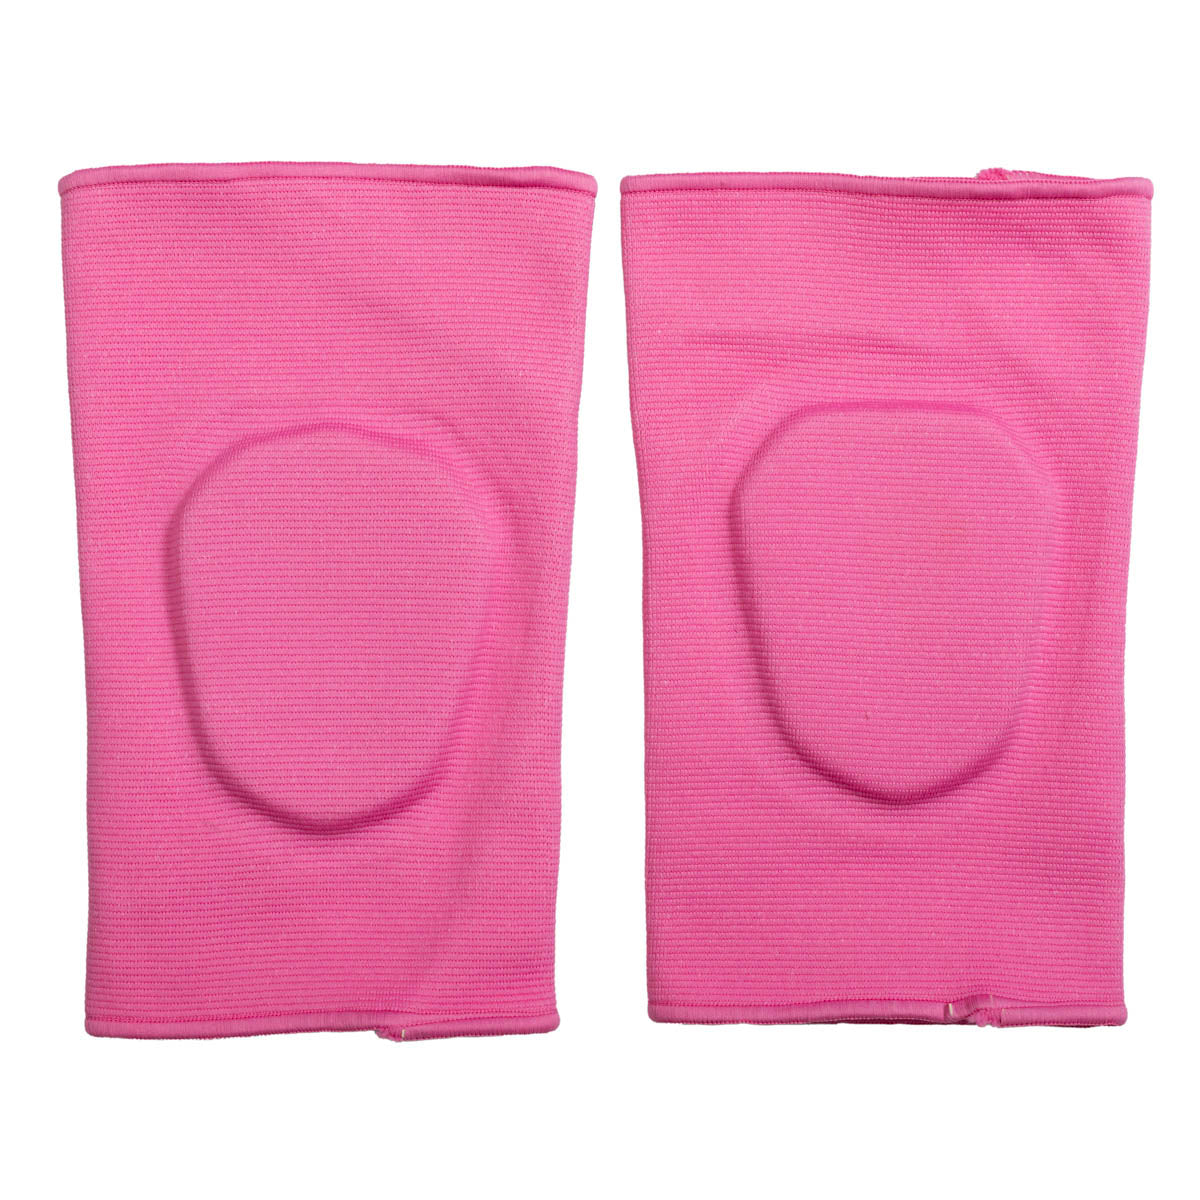 Versatile Knee Pads Multiple Colors for Workout, Rollerblading, Halloween Costumes, and Cosplay Accessories Pink